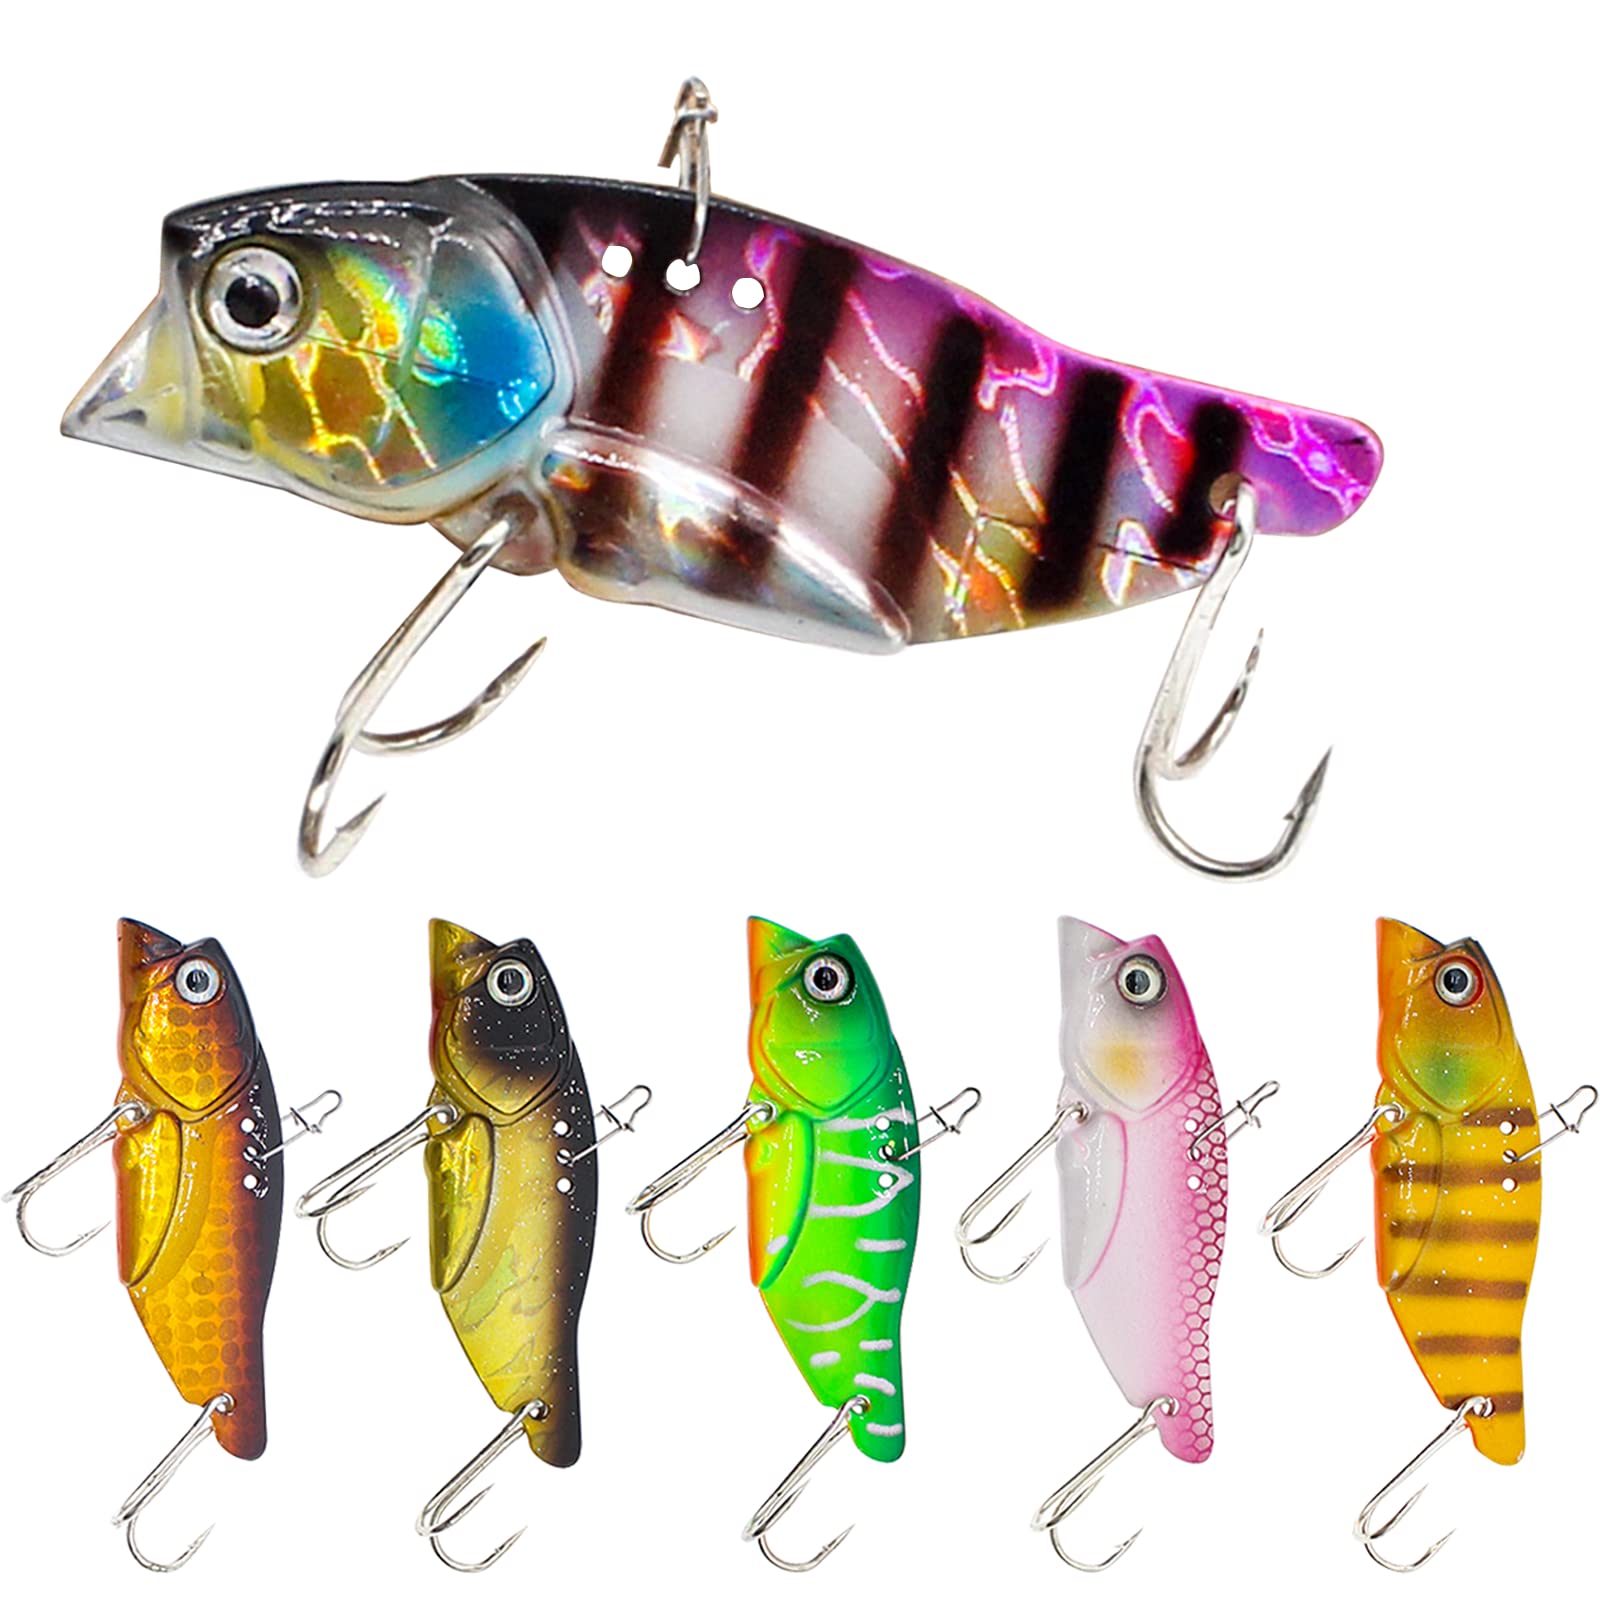 Ghanneey Fishing Lures Fishing Spoons Fishing Spinner Blades Spoon with  Treble Feather Hooks for Trout Salmon Bass Crappie Pike B:Fishing Spoon  Lures 6pcs